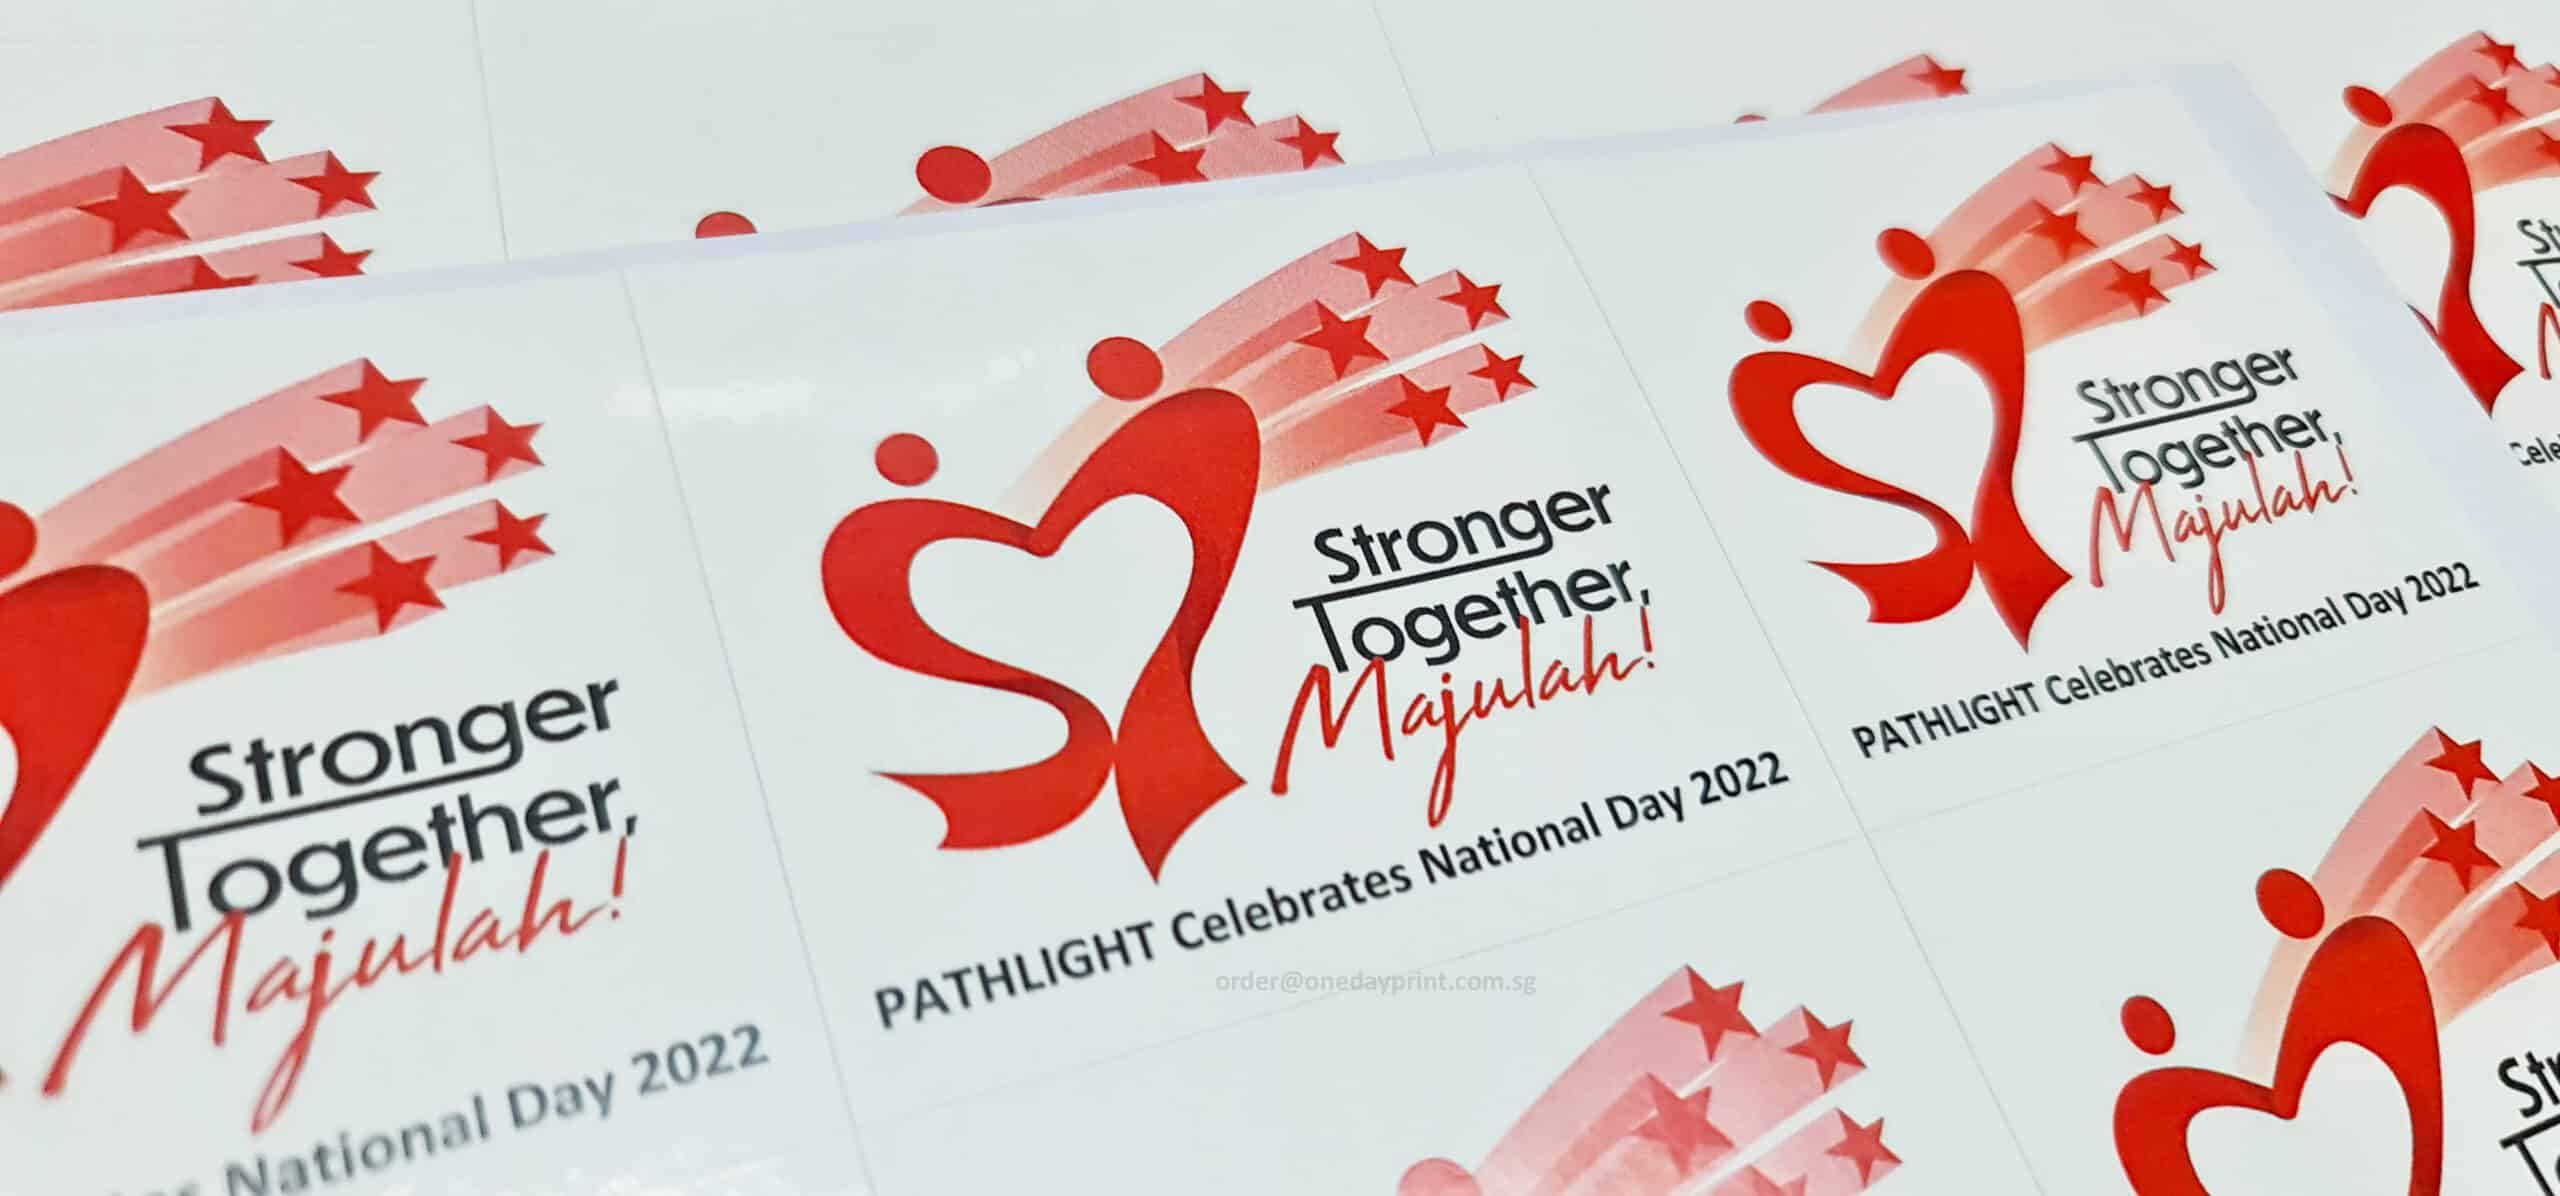 Rectangle Shape Stickers, Mirrorkote Sticker Material, Stronger Together, Majulah! PATHLIGHT celebrates National Day 2022, Kiss-cut on sheet